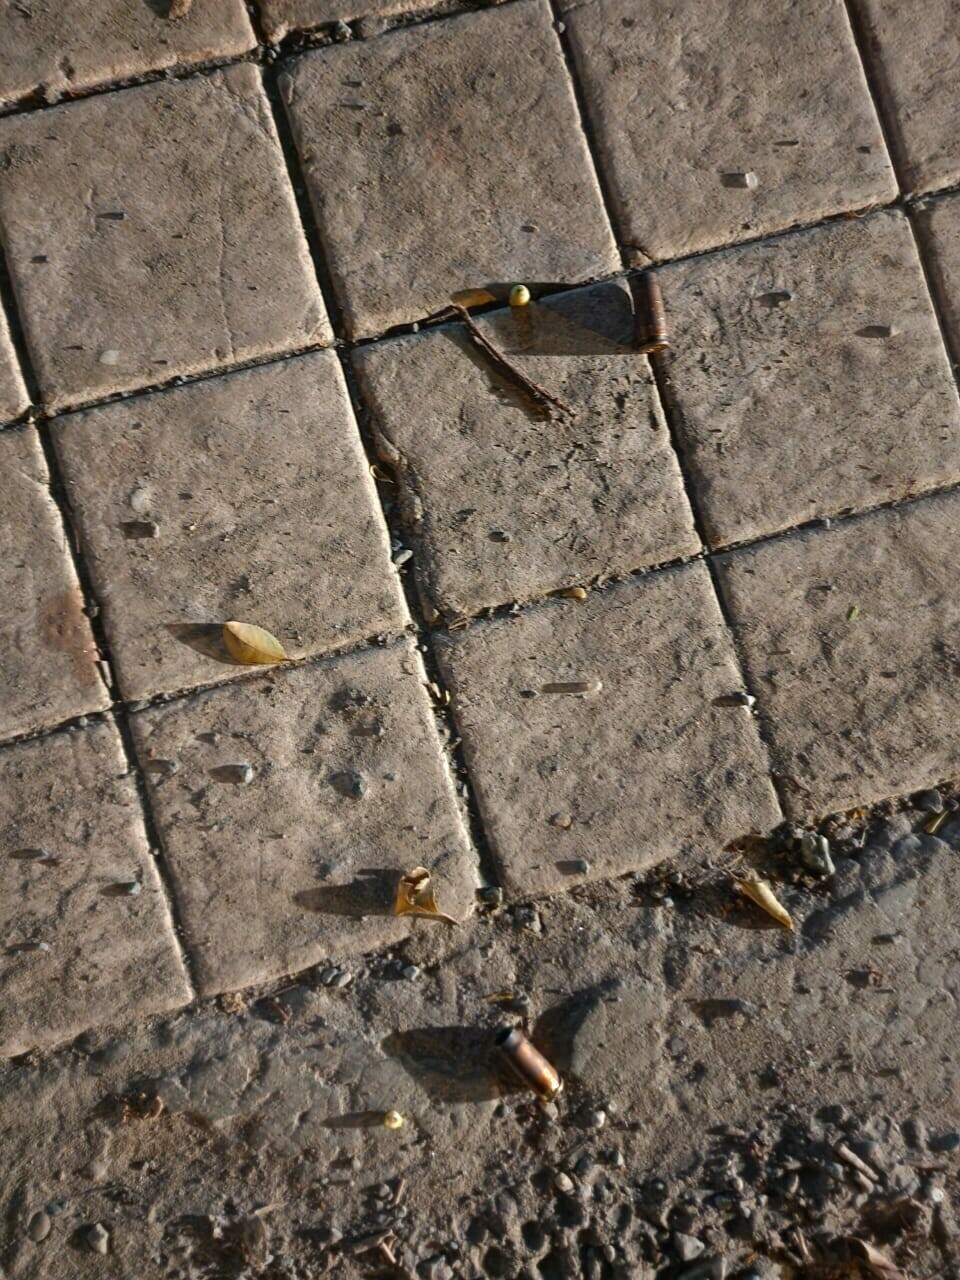 Bullets could be seen lying on the ground after unknown men opened fire at Sardar Latif Khosa’s house in Lahore in the early hours of Friday. — Photo provided by Wasim Riaz 